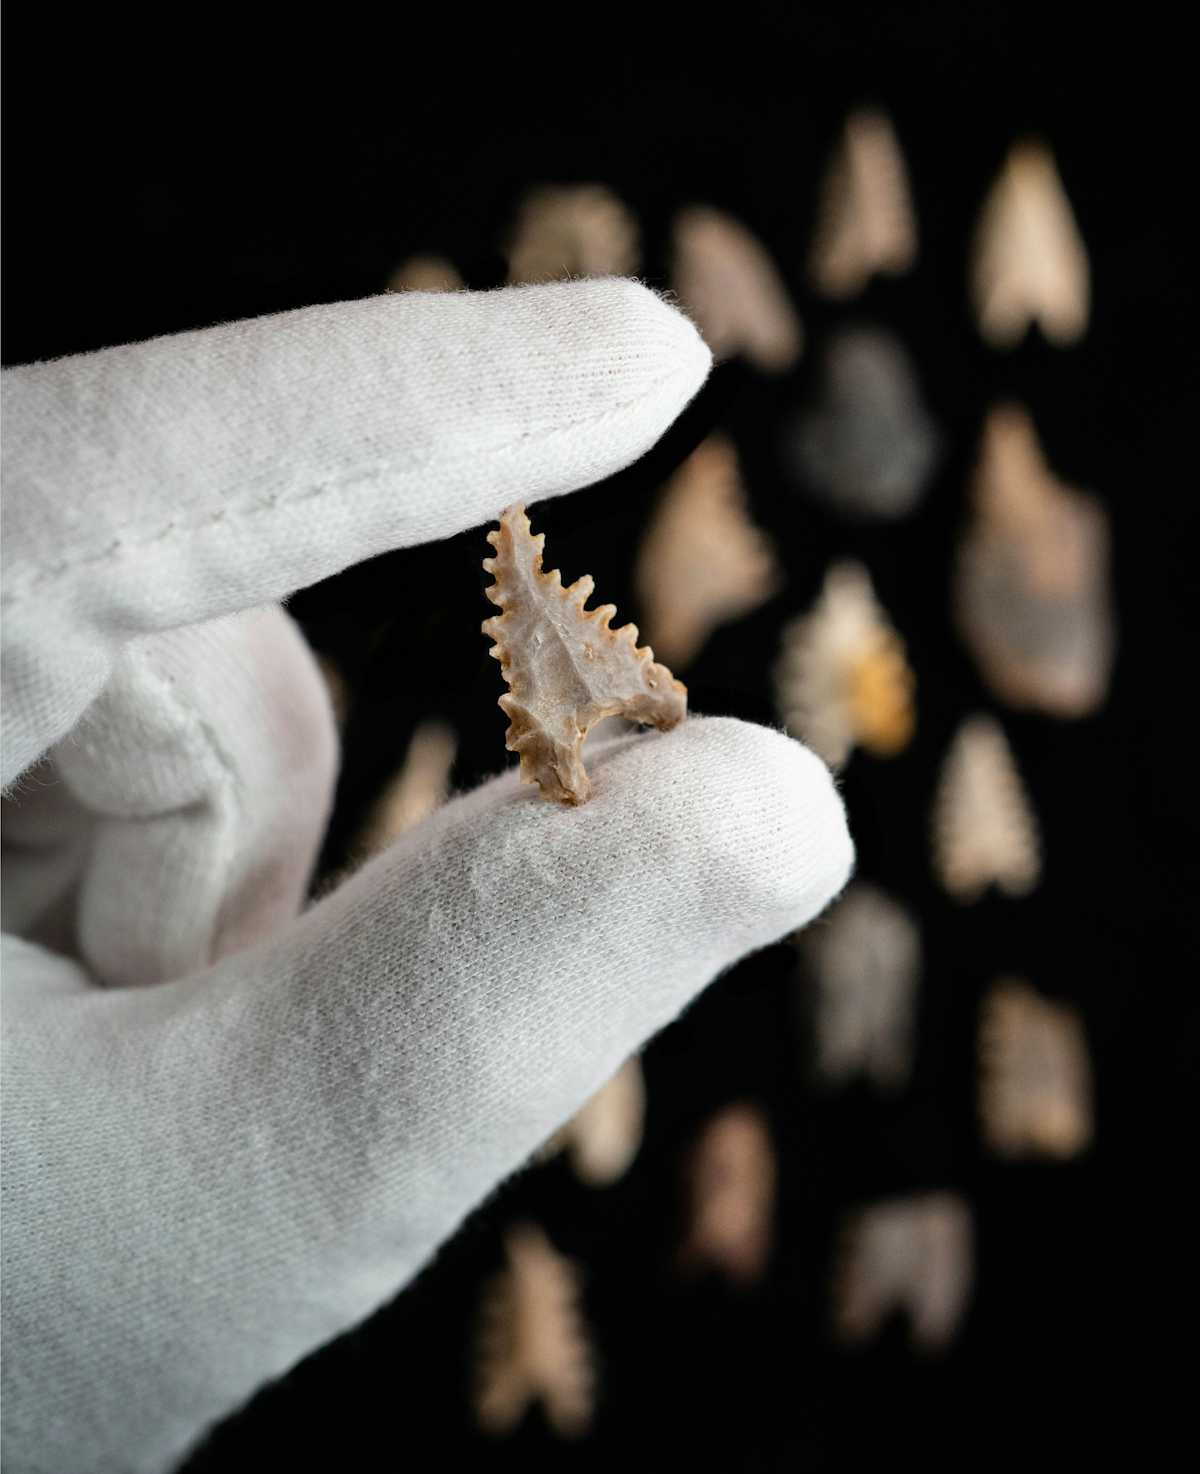 A Toalean stone arrowhead, known as a Maros point. Classic Maros points are small (roughly 2.5cm in maxiumum dimension) and were fashioned with rows of fine tooth-like serrations along the sides and tip, and wing-like projections at the base. Although this particular stone technology seems to have been unique to the Toalean culture, similar projectile points were produced in northern Australia, Java and Japan. Shahna Britton/Andrew Thomson.